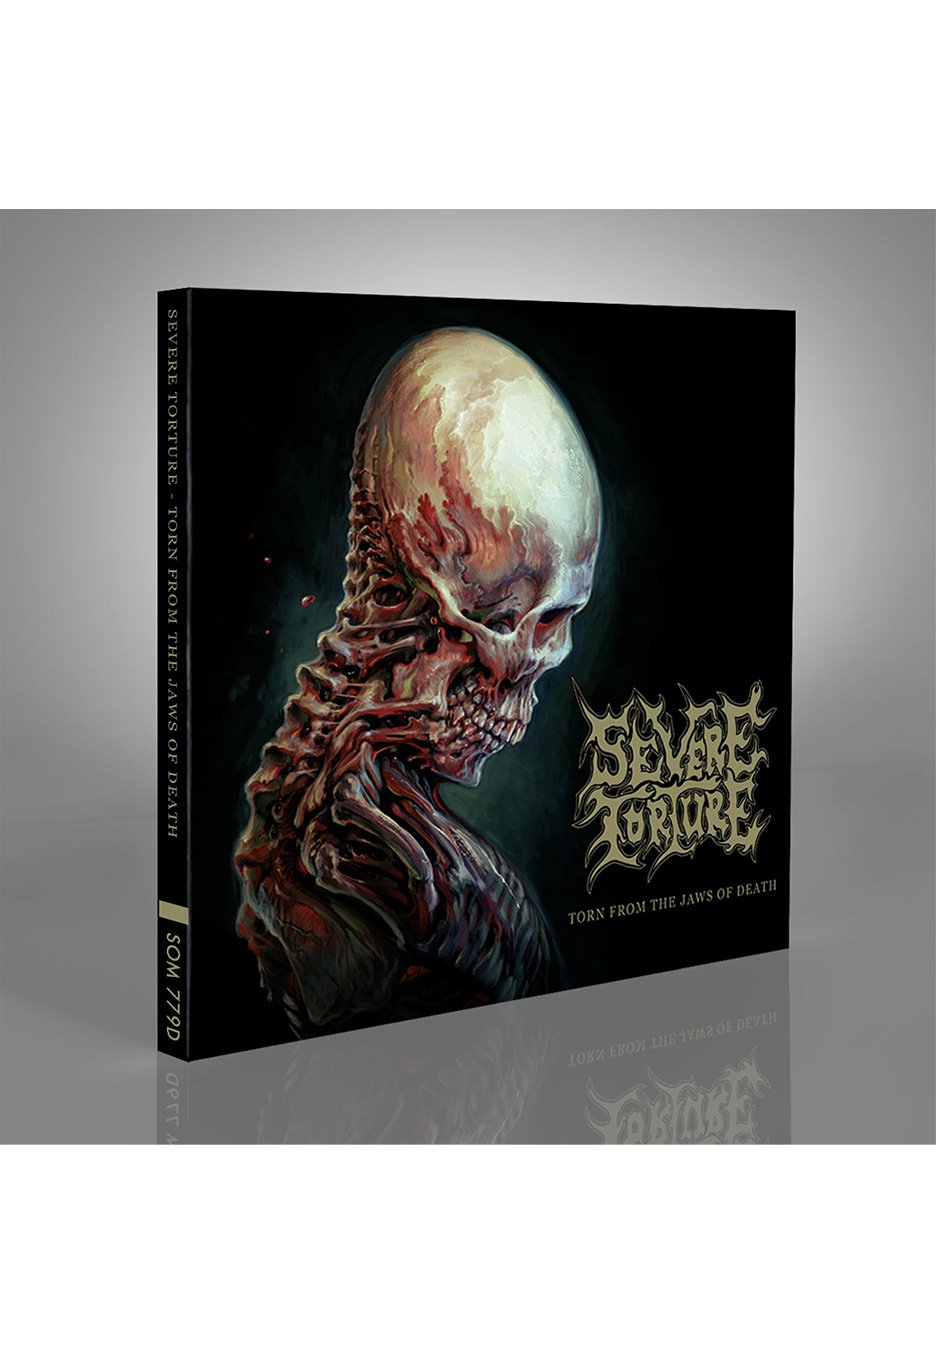 Severe Torture - Torn From The Jaws Of Death - Digipak CD